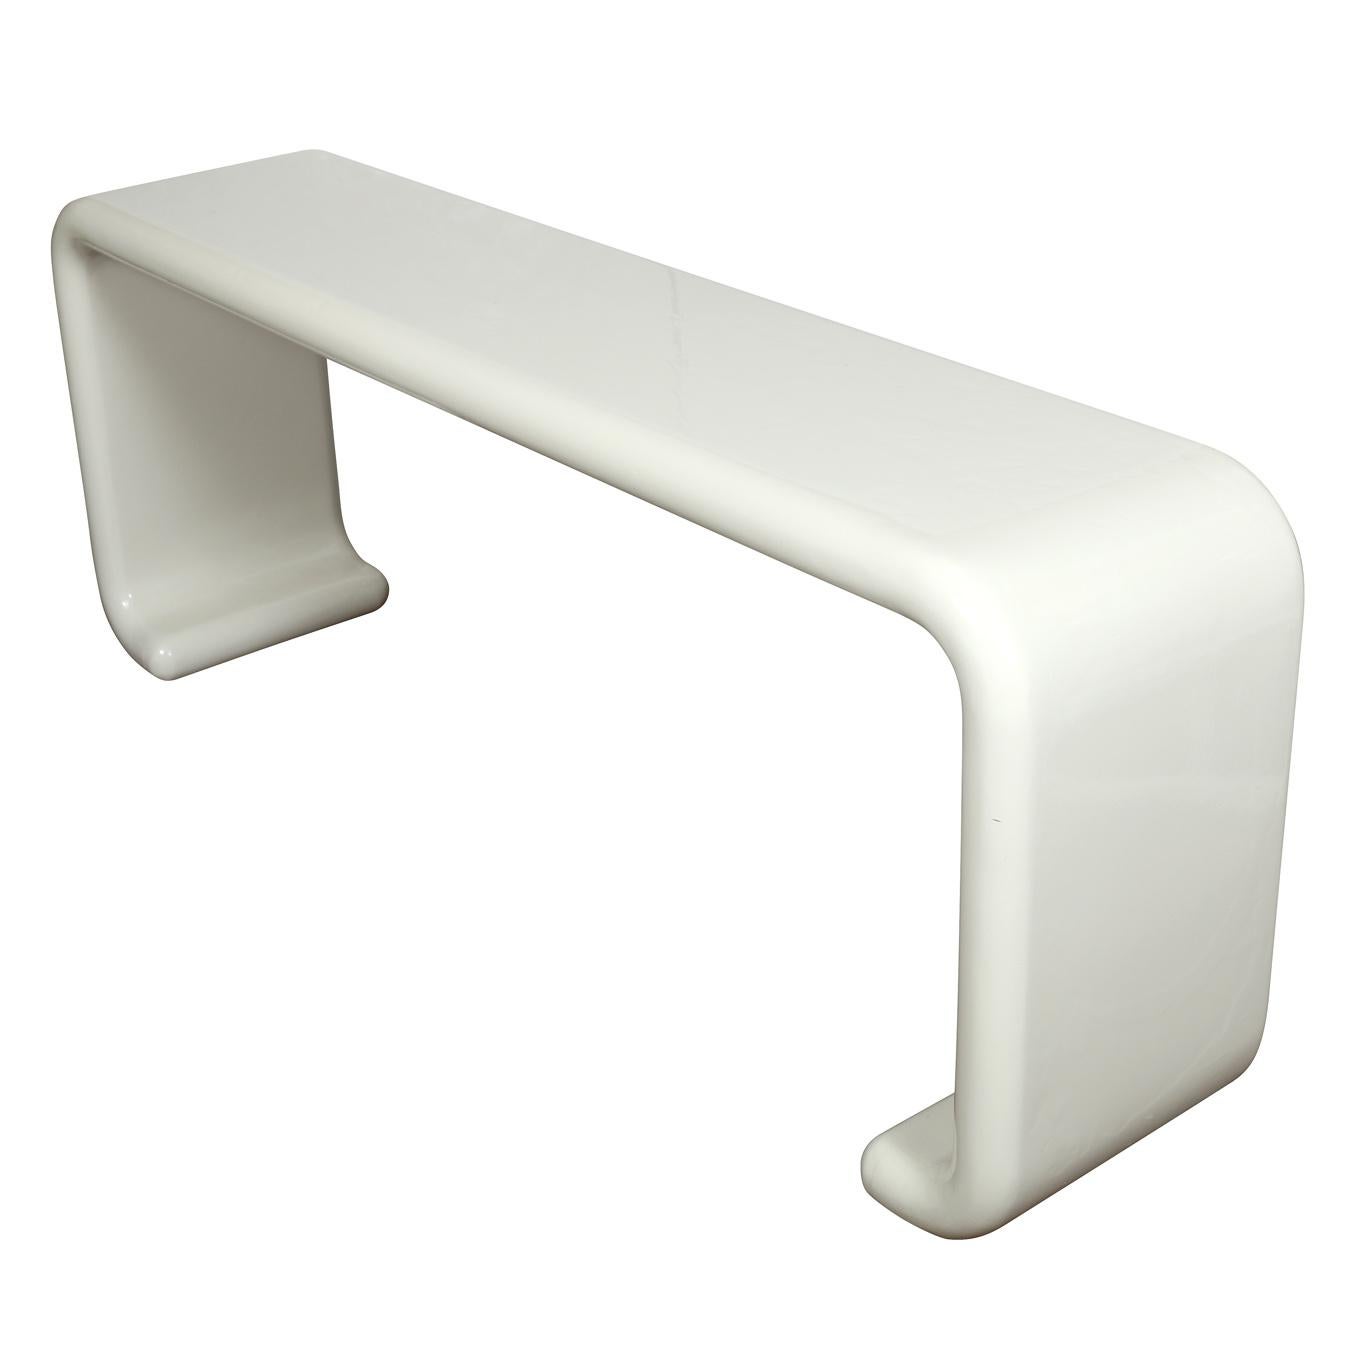 Karl Springer style, white painted waterfall edge long console.